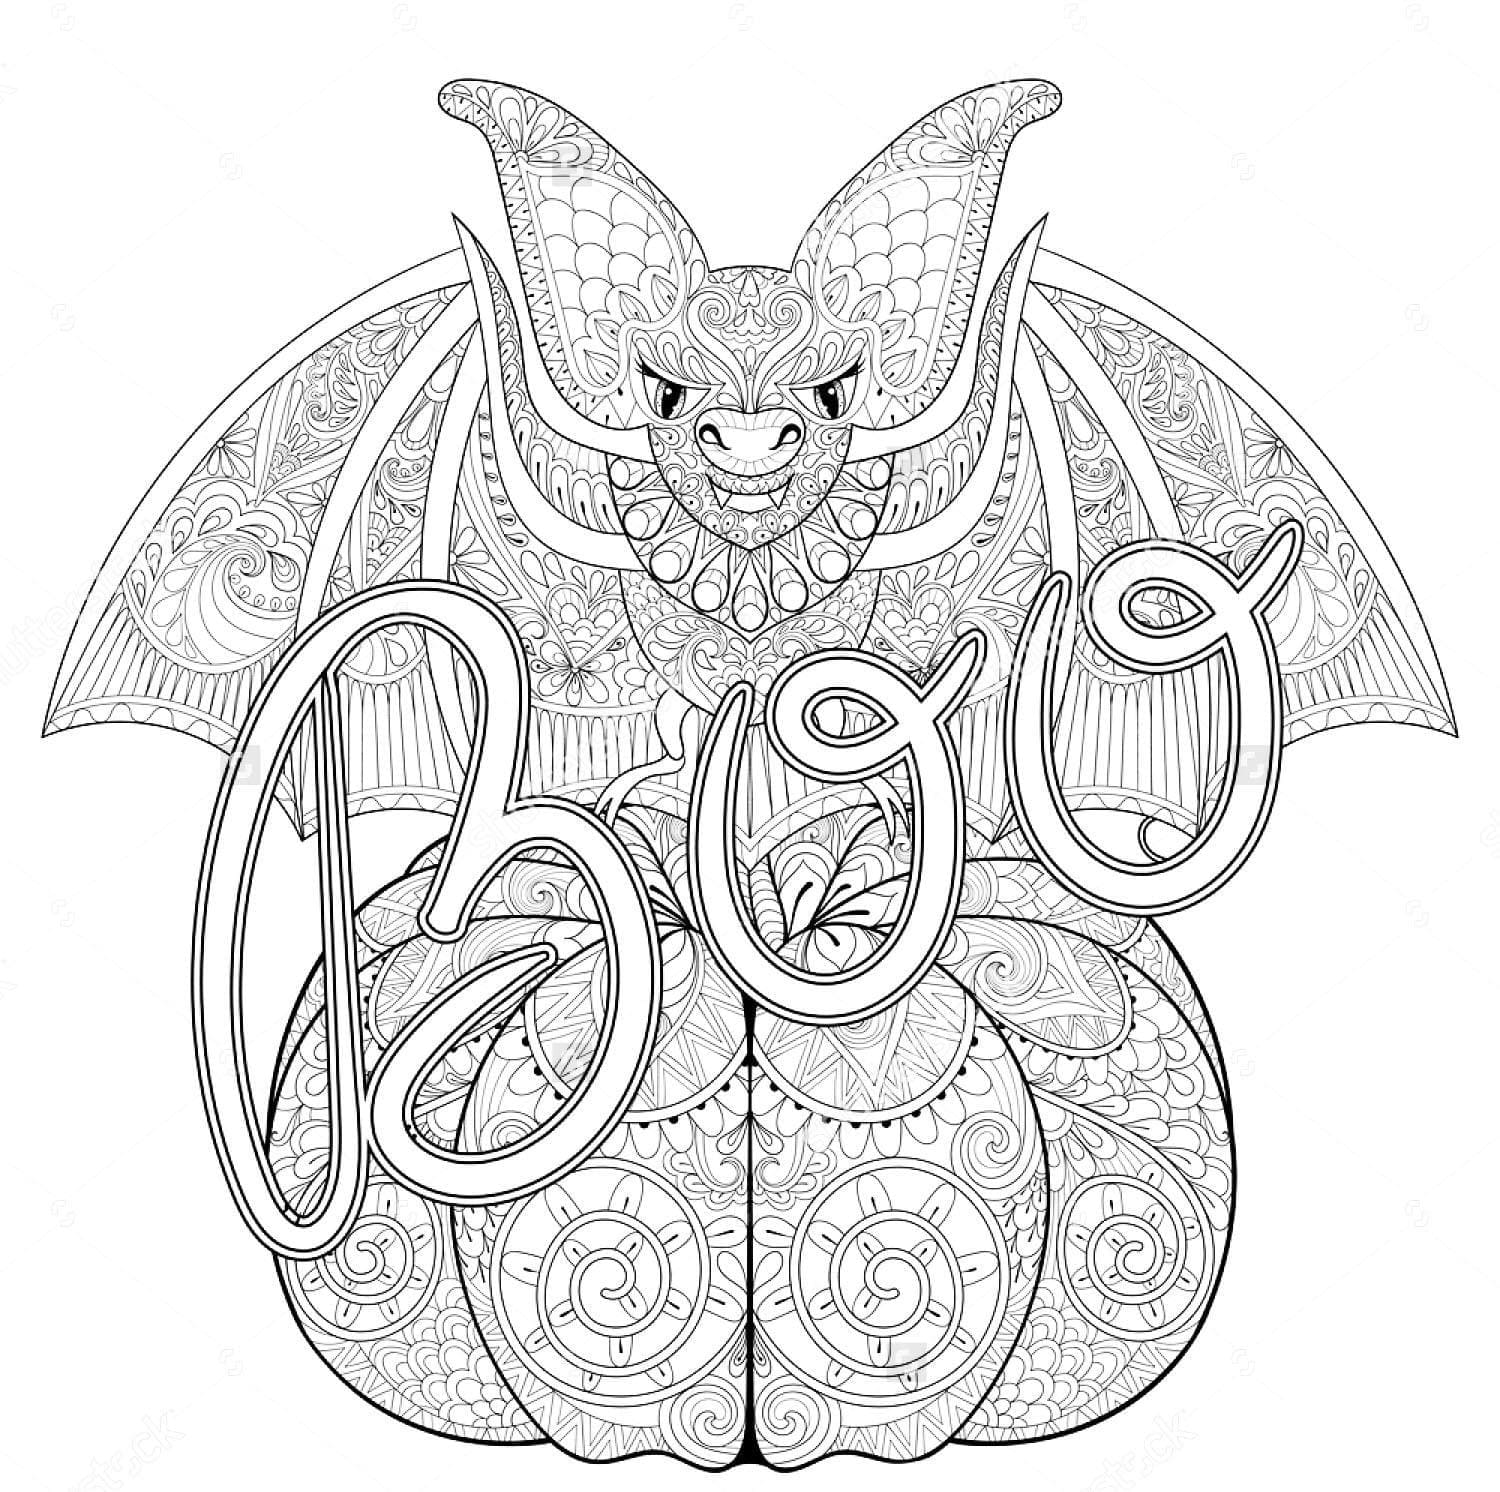 Halloween Bat and Pumpkin for Adults coloring page - Download, Print or ...